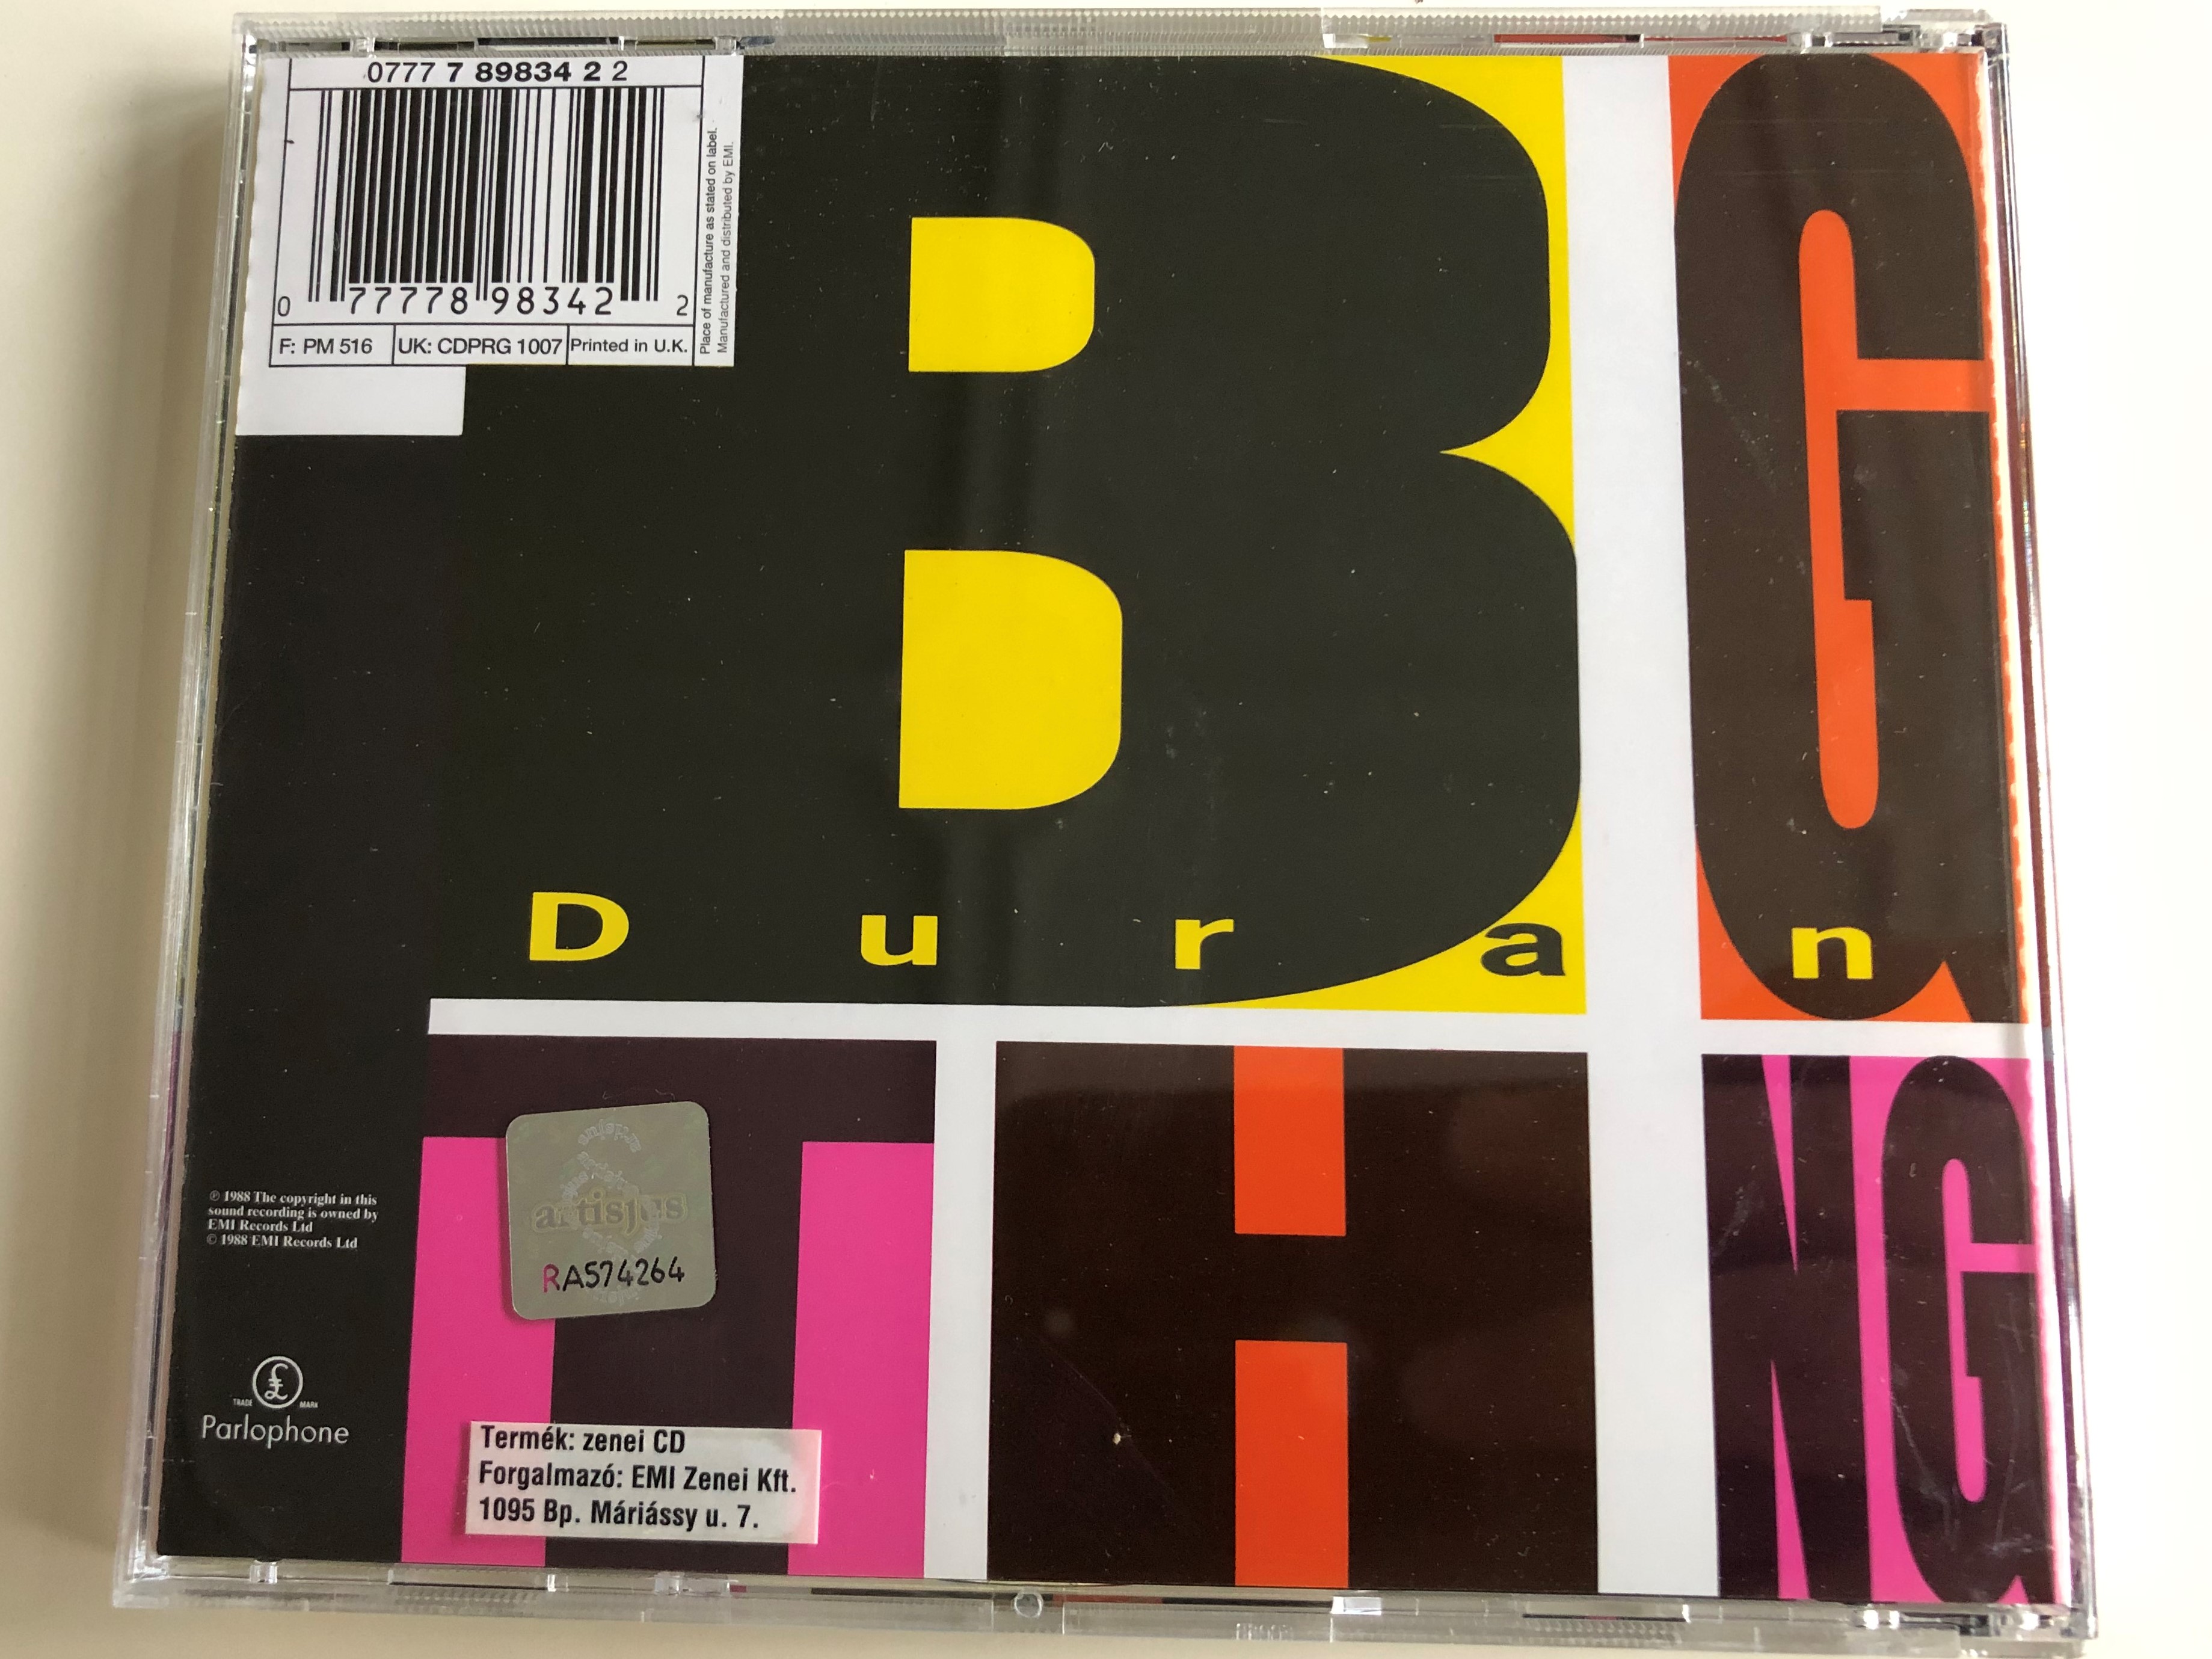 duran-duran-big-thing-too-late-marlene-drug-do-you-believe-in-shame-the-edge-of-america-cdprg-1007-audio-cd-recording-from-1988-emi-records-3-.jpg